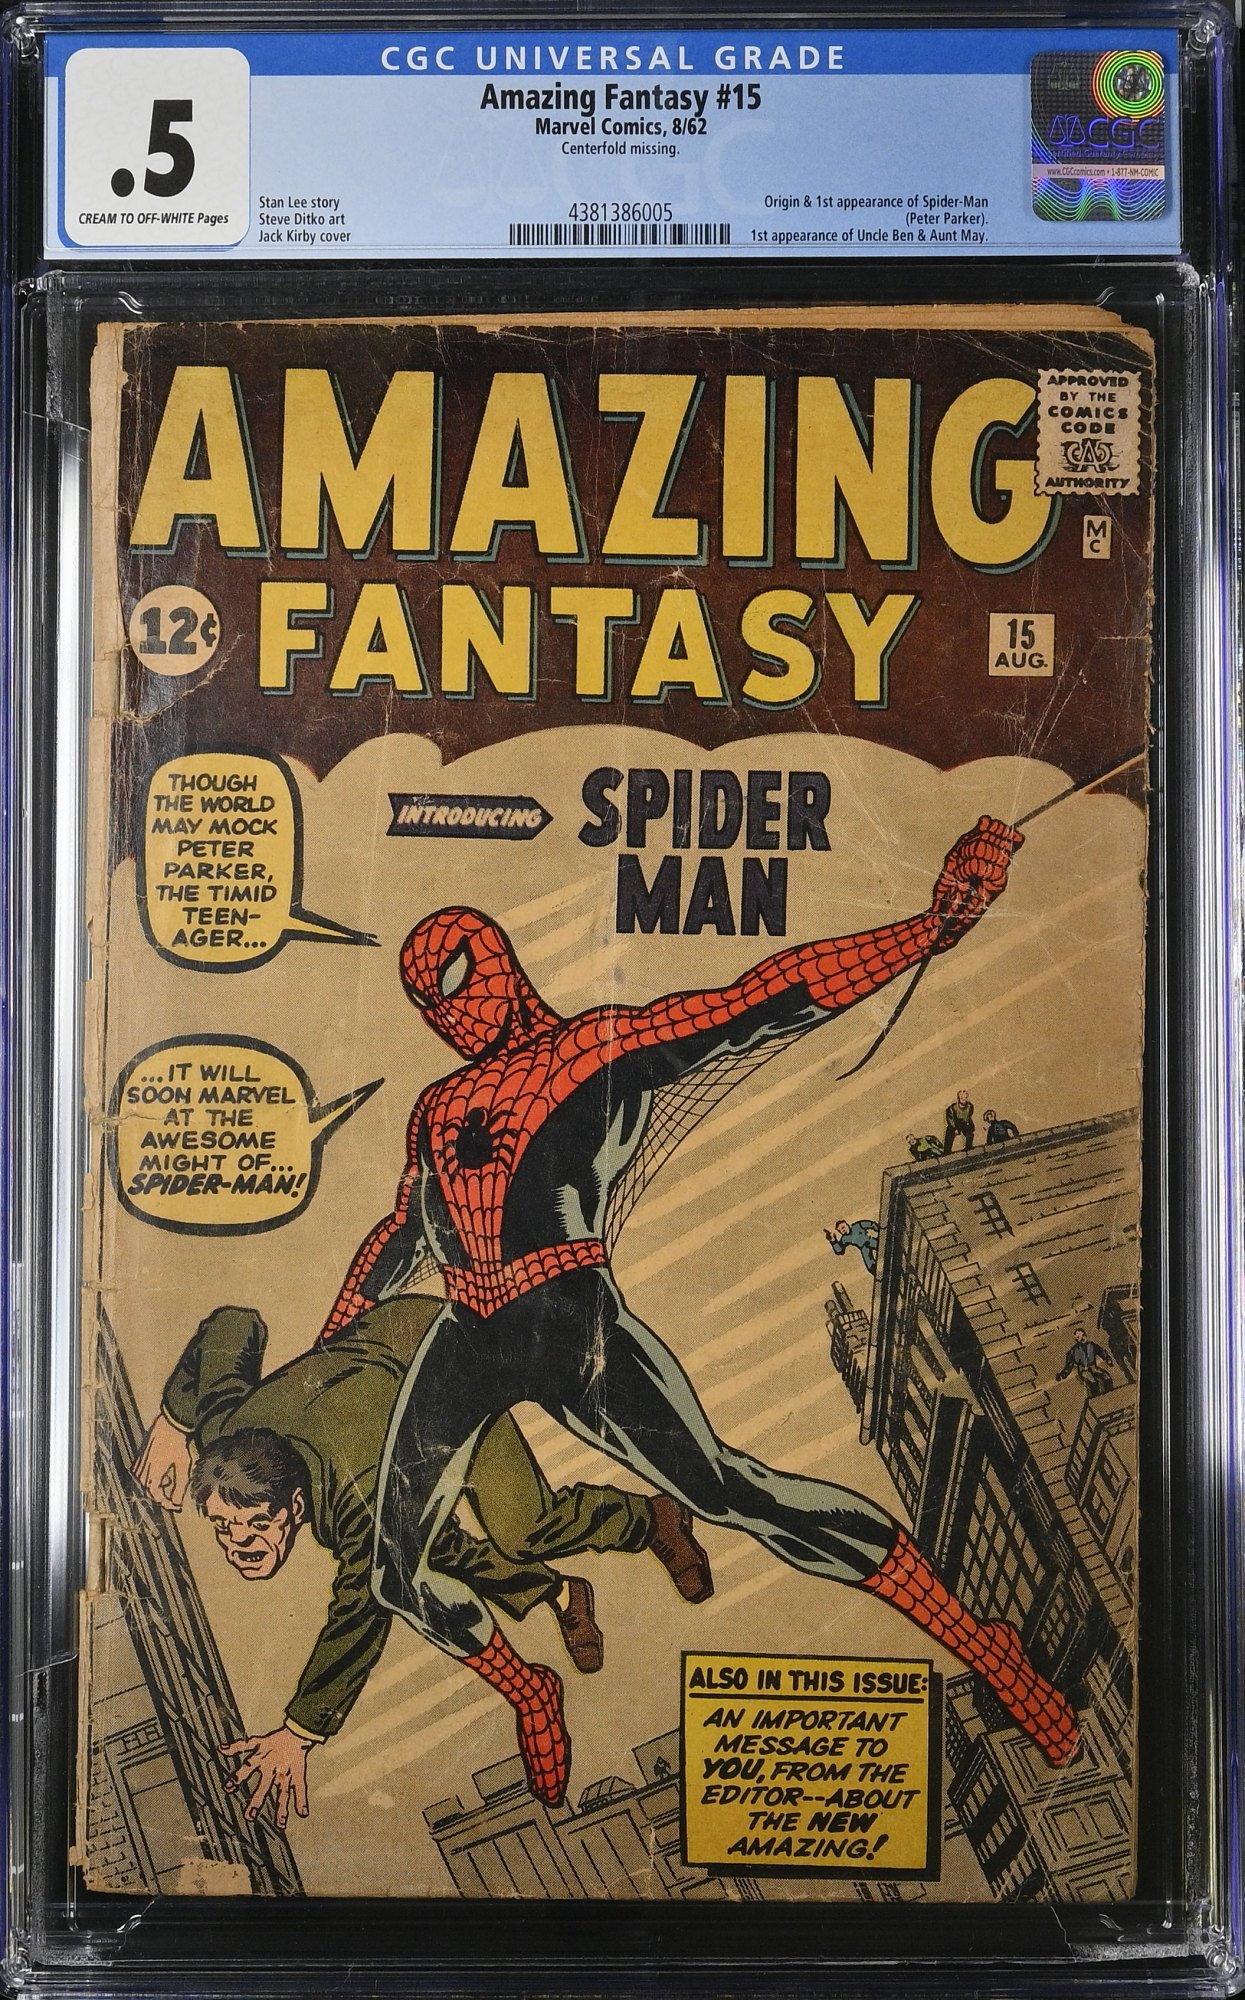 Amazing Fantasy #15 CGC P 0.5 1st Appearance Spider-Man Kirby Cover!